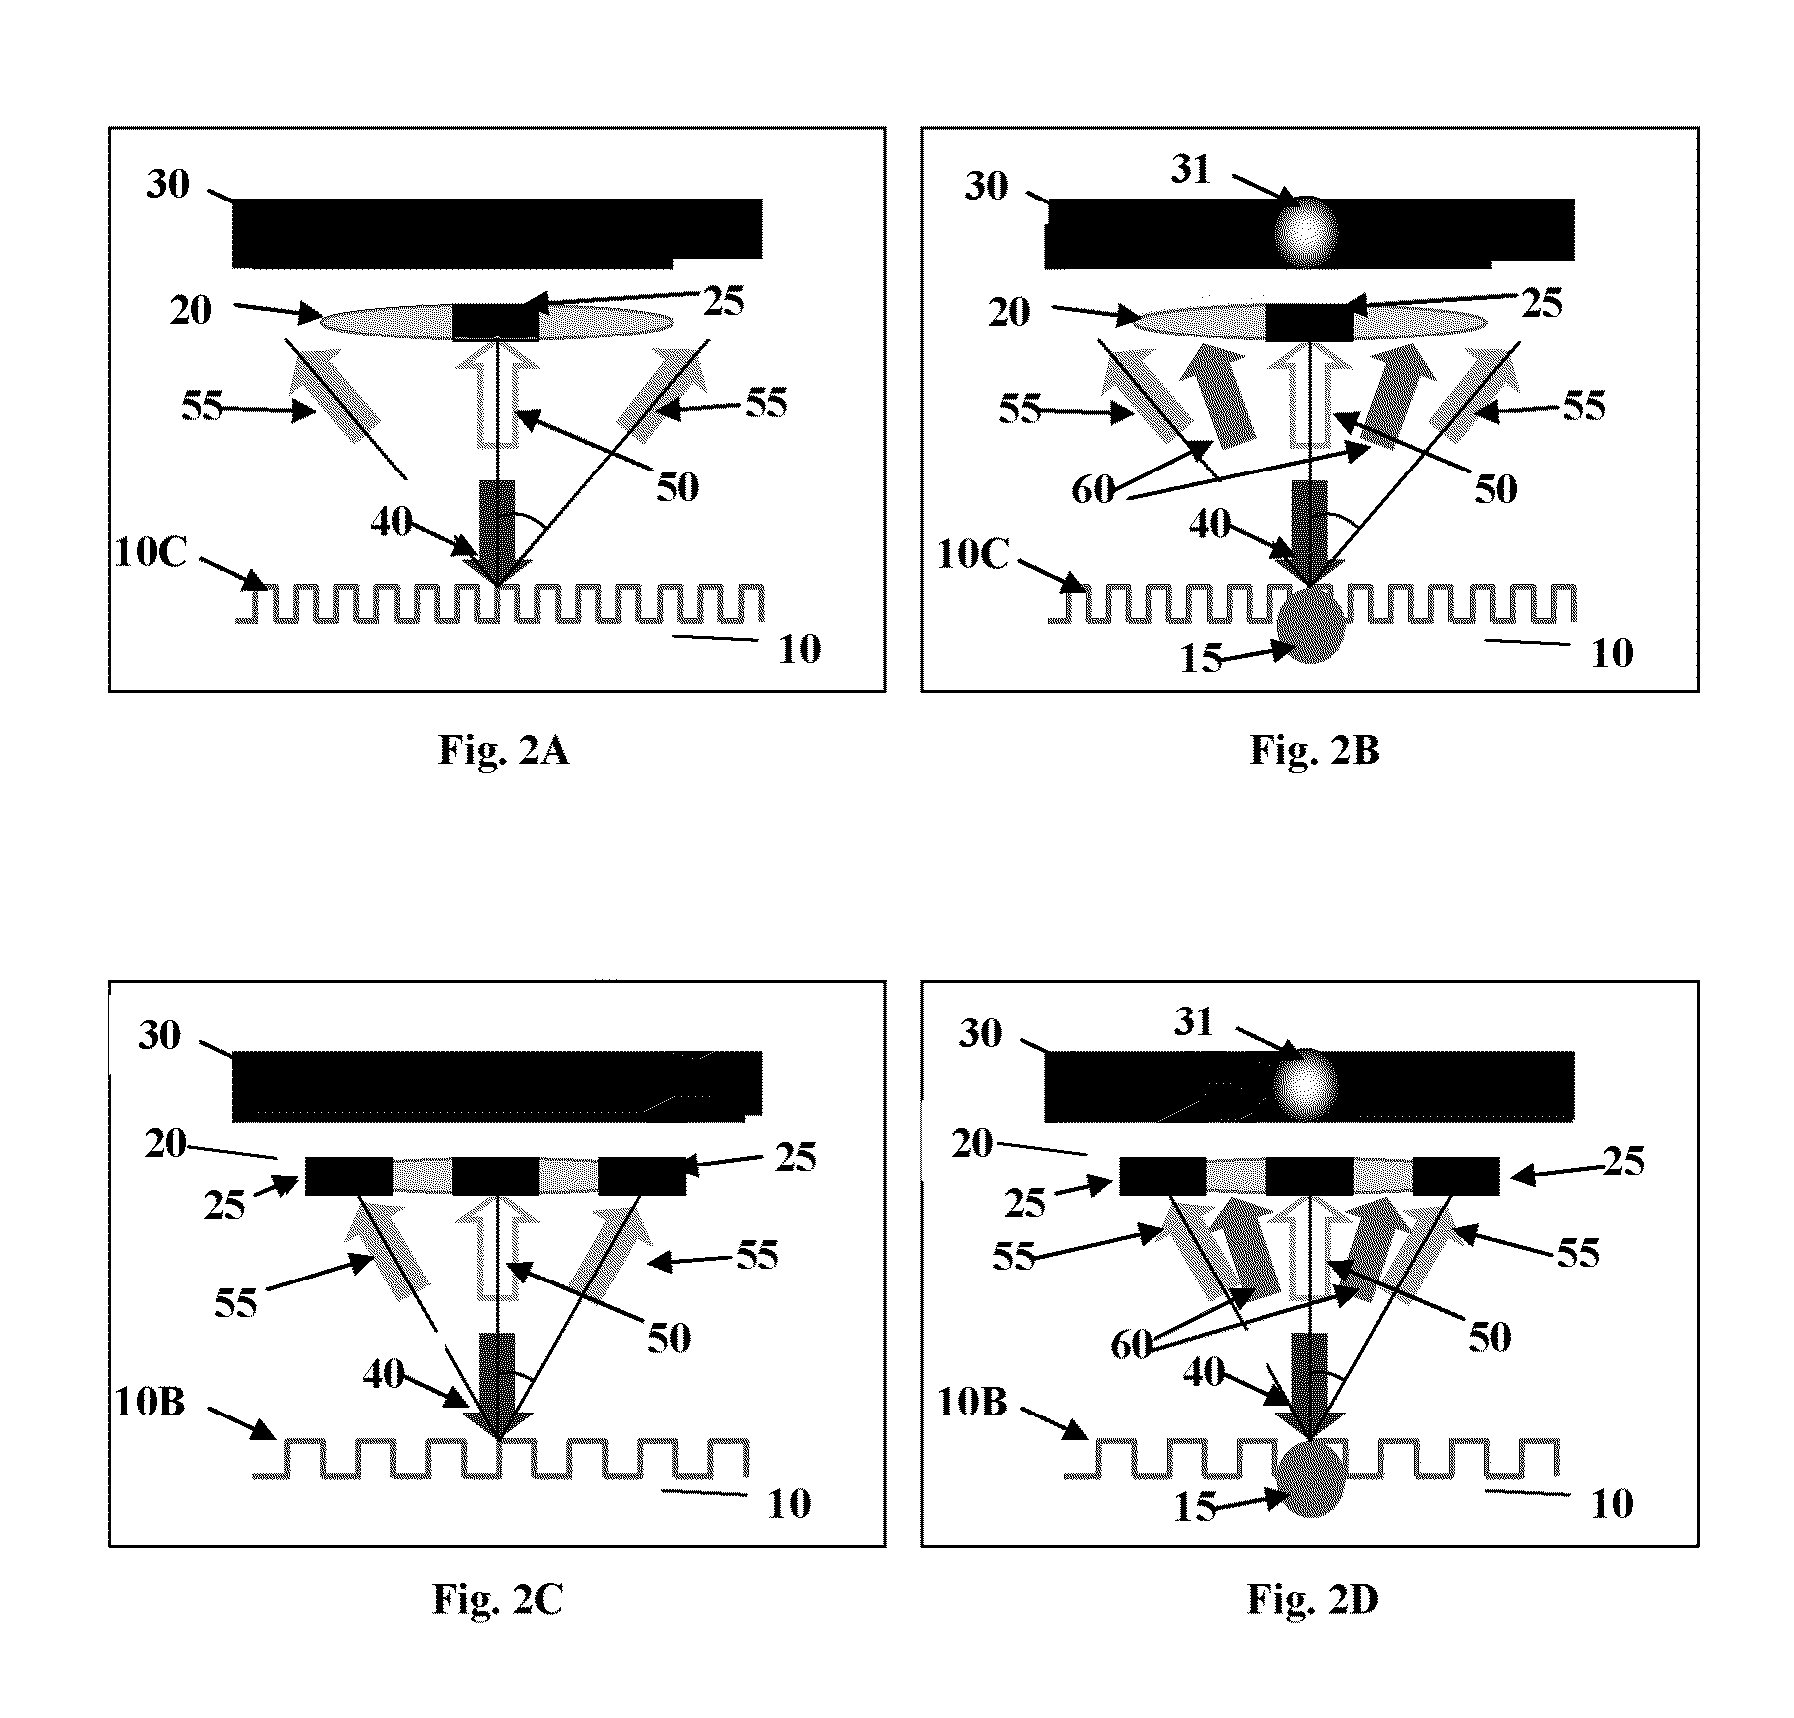 Optical system and method for inspection of patterned samples